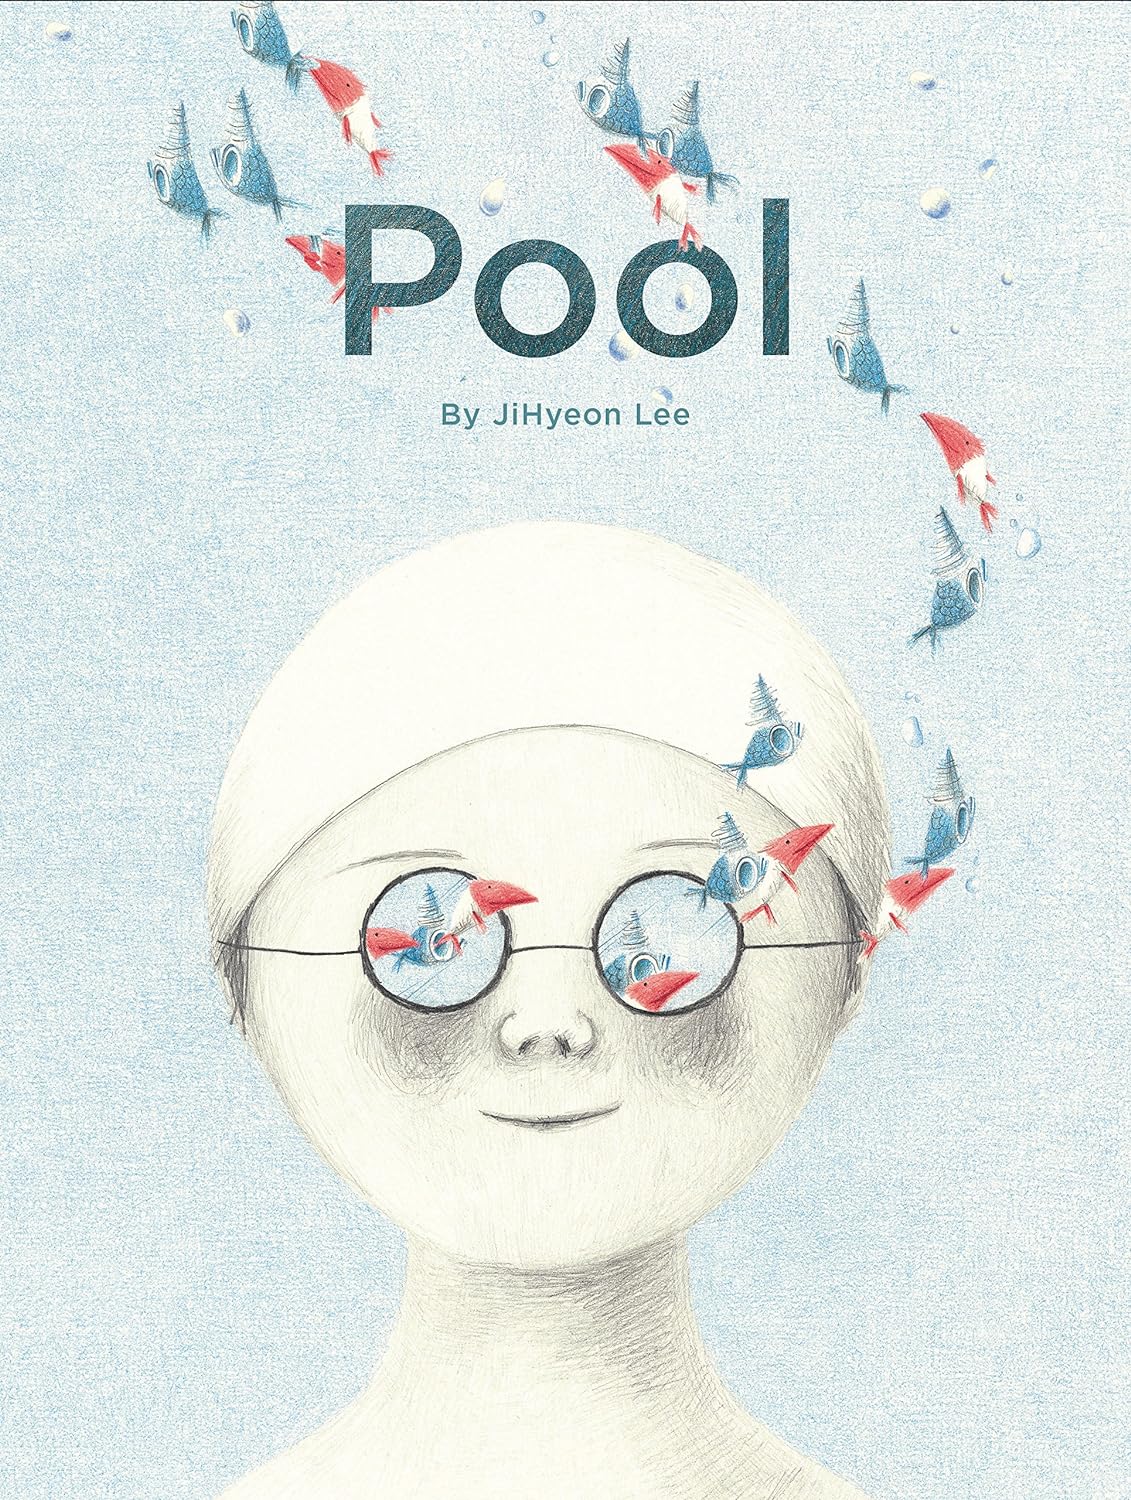 Cover for Pool featuring a pencil illustration of the face of a young girl with goggles and a swim cap on and fish are emerging from her goggles as if swimming through and from them. The background is a textured bluish white.